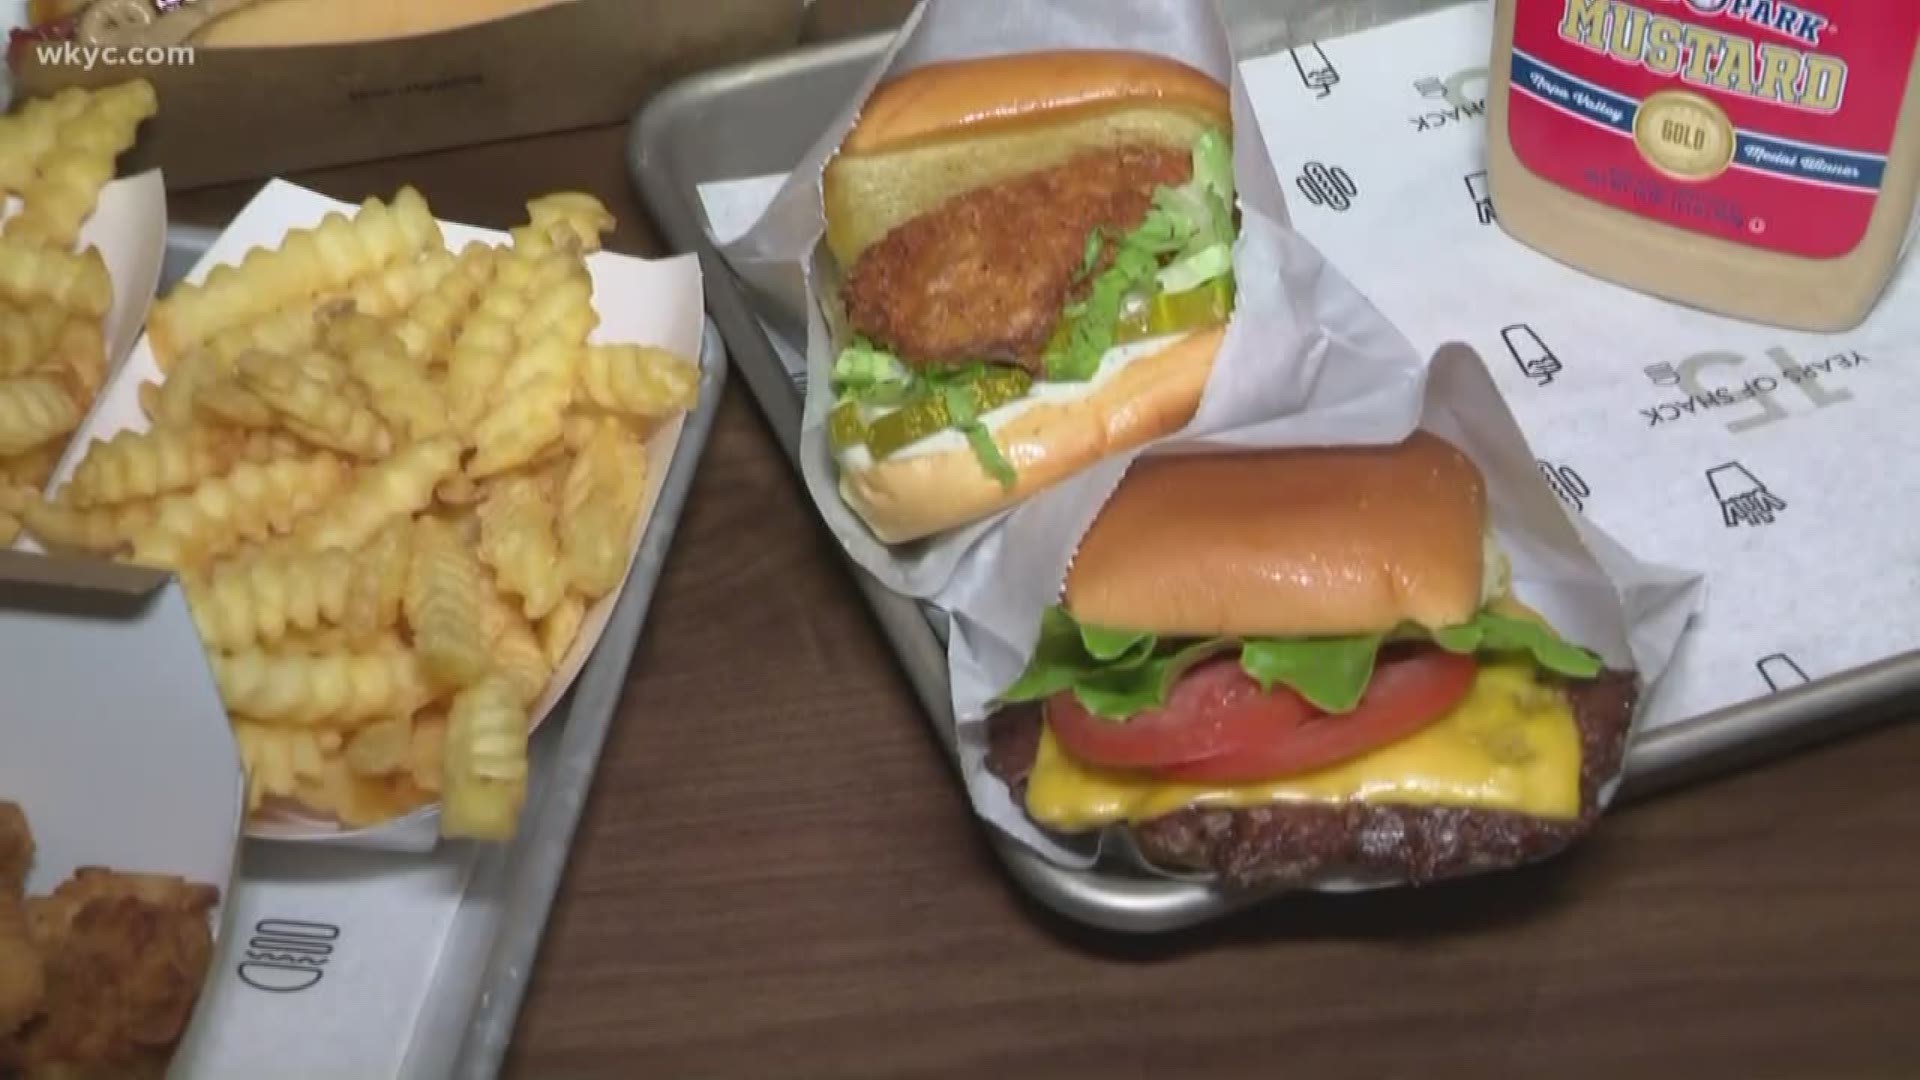 June 20, 2019: Hungry? You will be. We get a closer look at the staple burgers, fries and shakes on the Shake Shack menu inside the new restaurant in downtown Cleveland. It's the third Shake Shack location in Northeast Ohio.